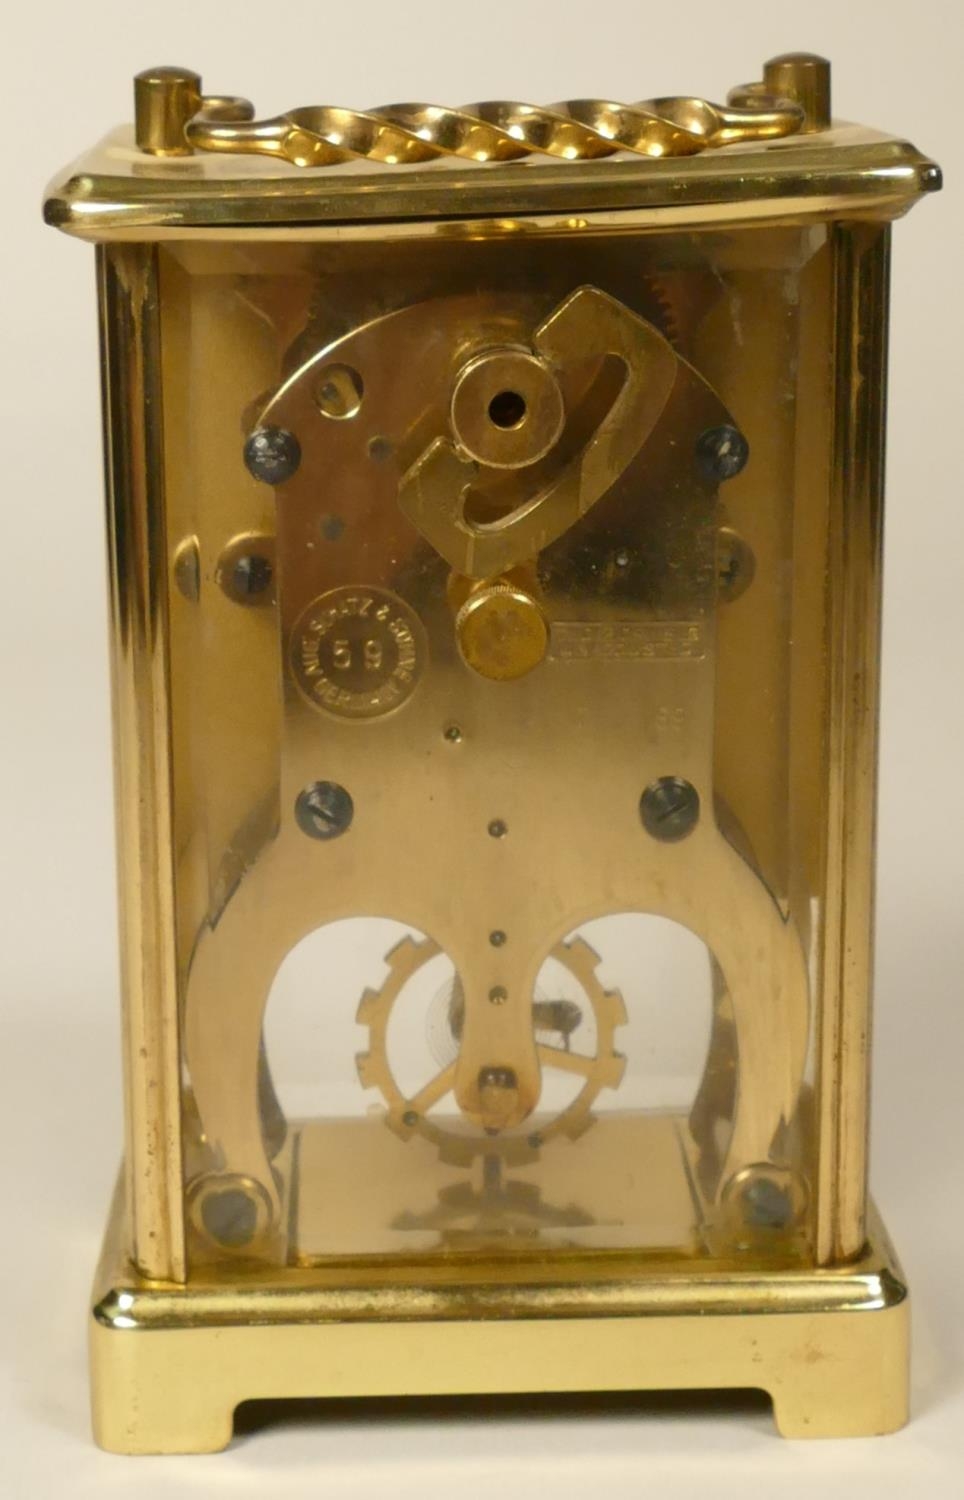 A Schatz 8 day, brass carriage time piece with visible escapement, together with another similar - Image 7 of 9